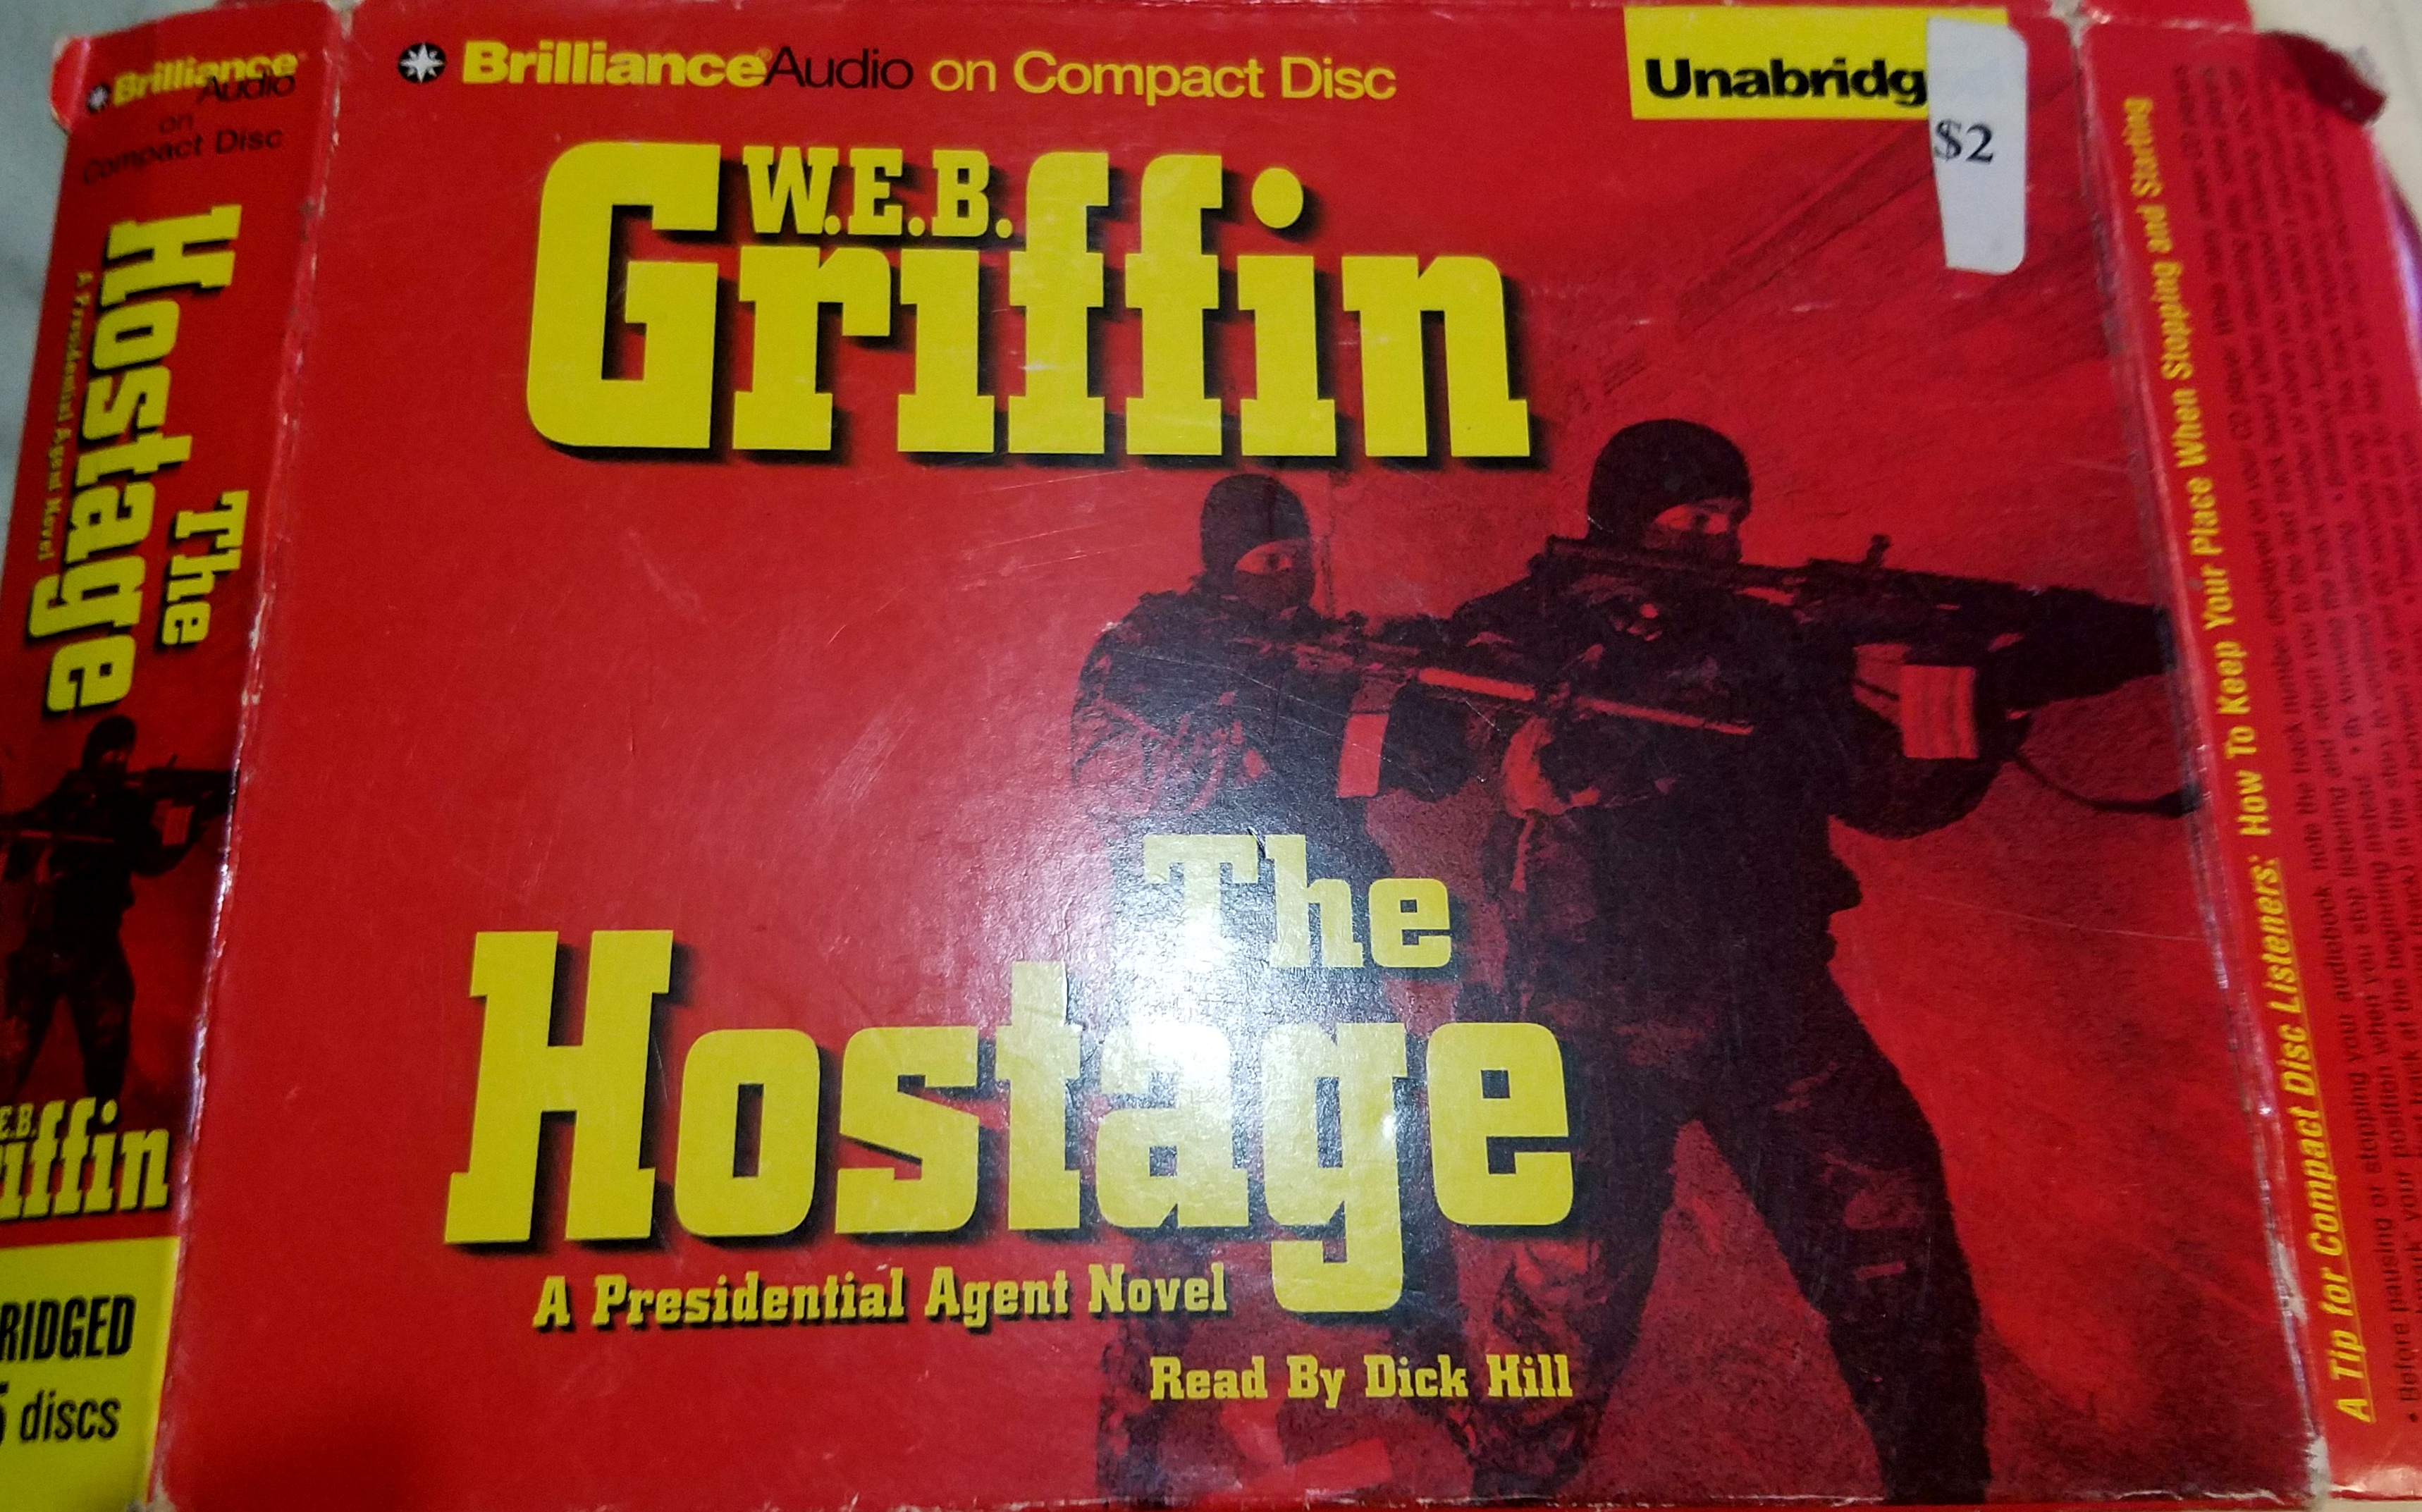 W.E.B. Griffin’s “The Hostage” reiterates “Caveat Emptor” when it comes to clearance sales